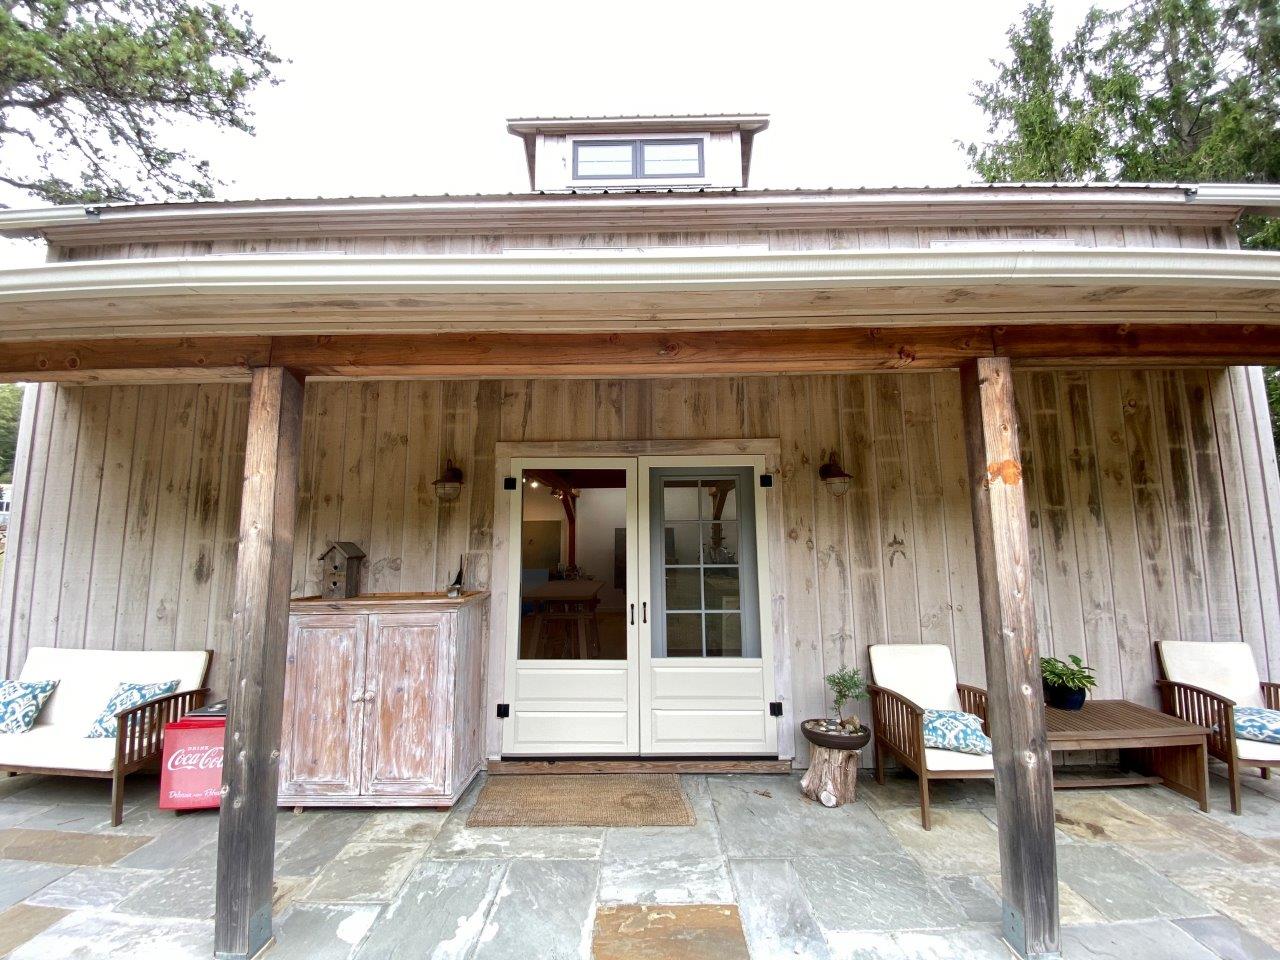 An exterior picture of the porch of Jessica Pisano's art studio with retro furniture and an antique Coca-Cola cooler.o